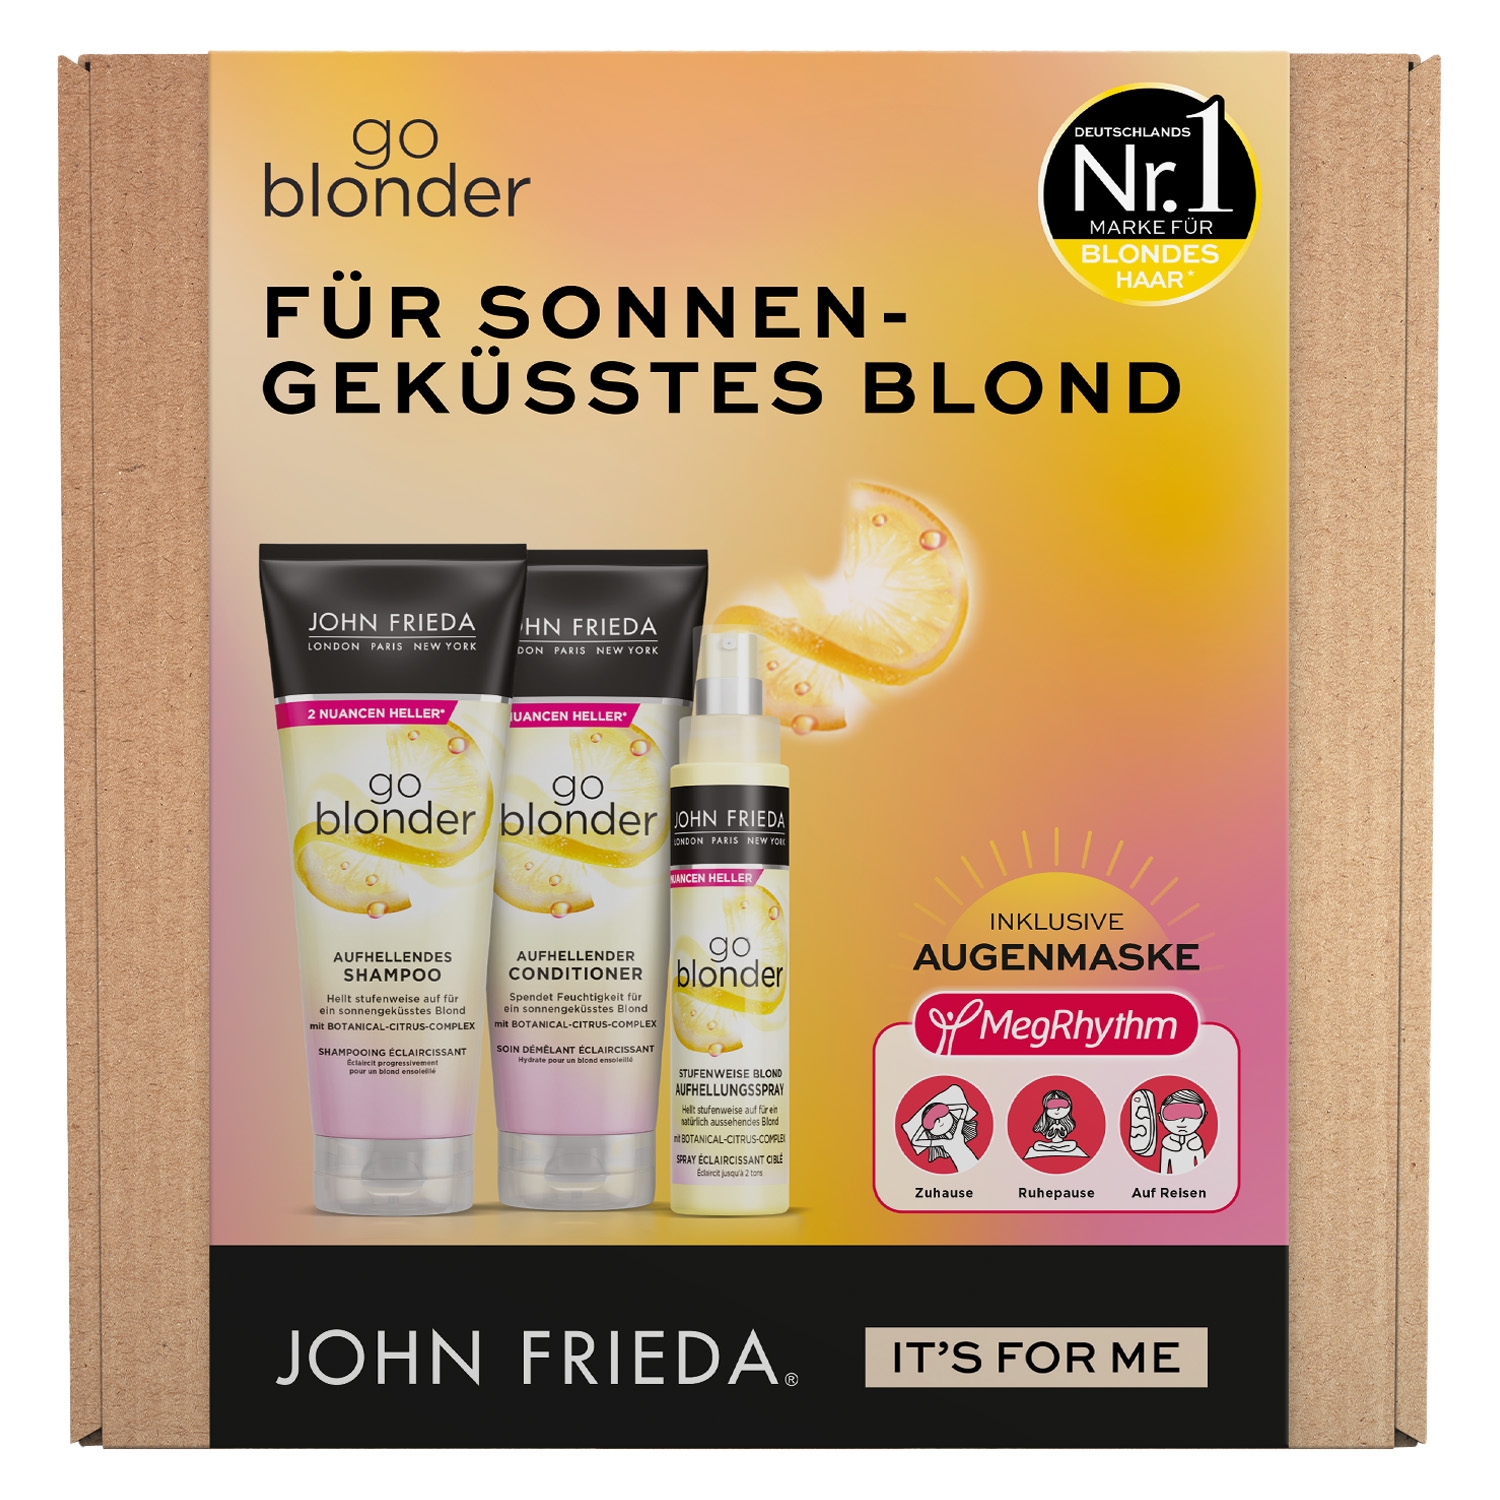 Product image from Sheer Blonde - Go Blonder Box